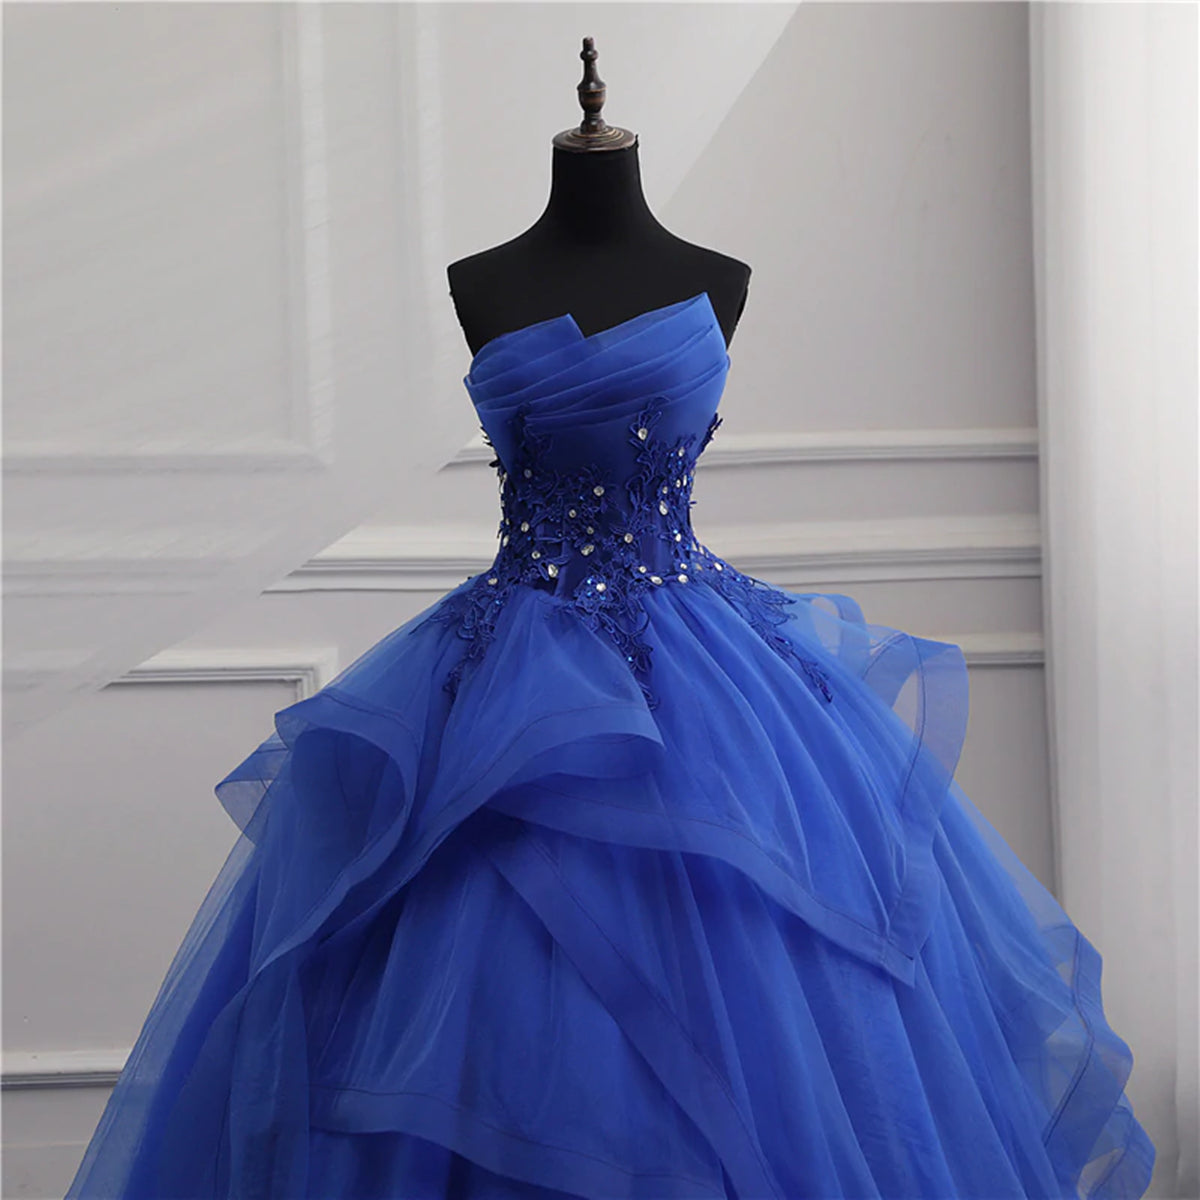 Party Dresses Formal, Royal Blue Lace Prom Dresses, Royal Blue Lace Formal Graduation Dresses